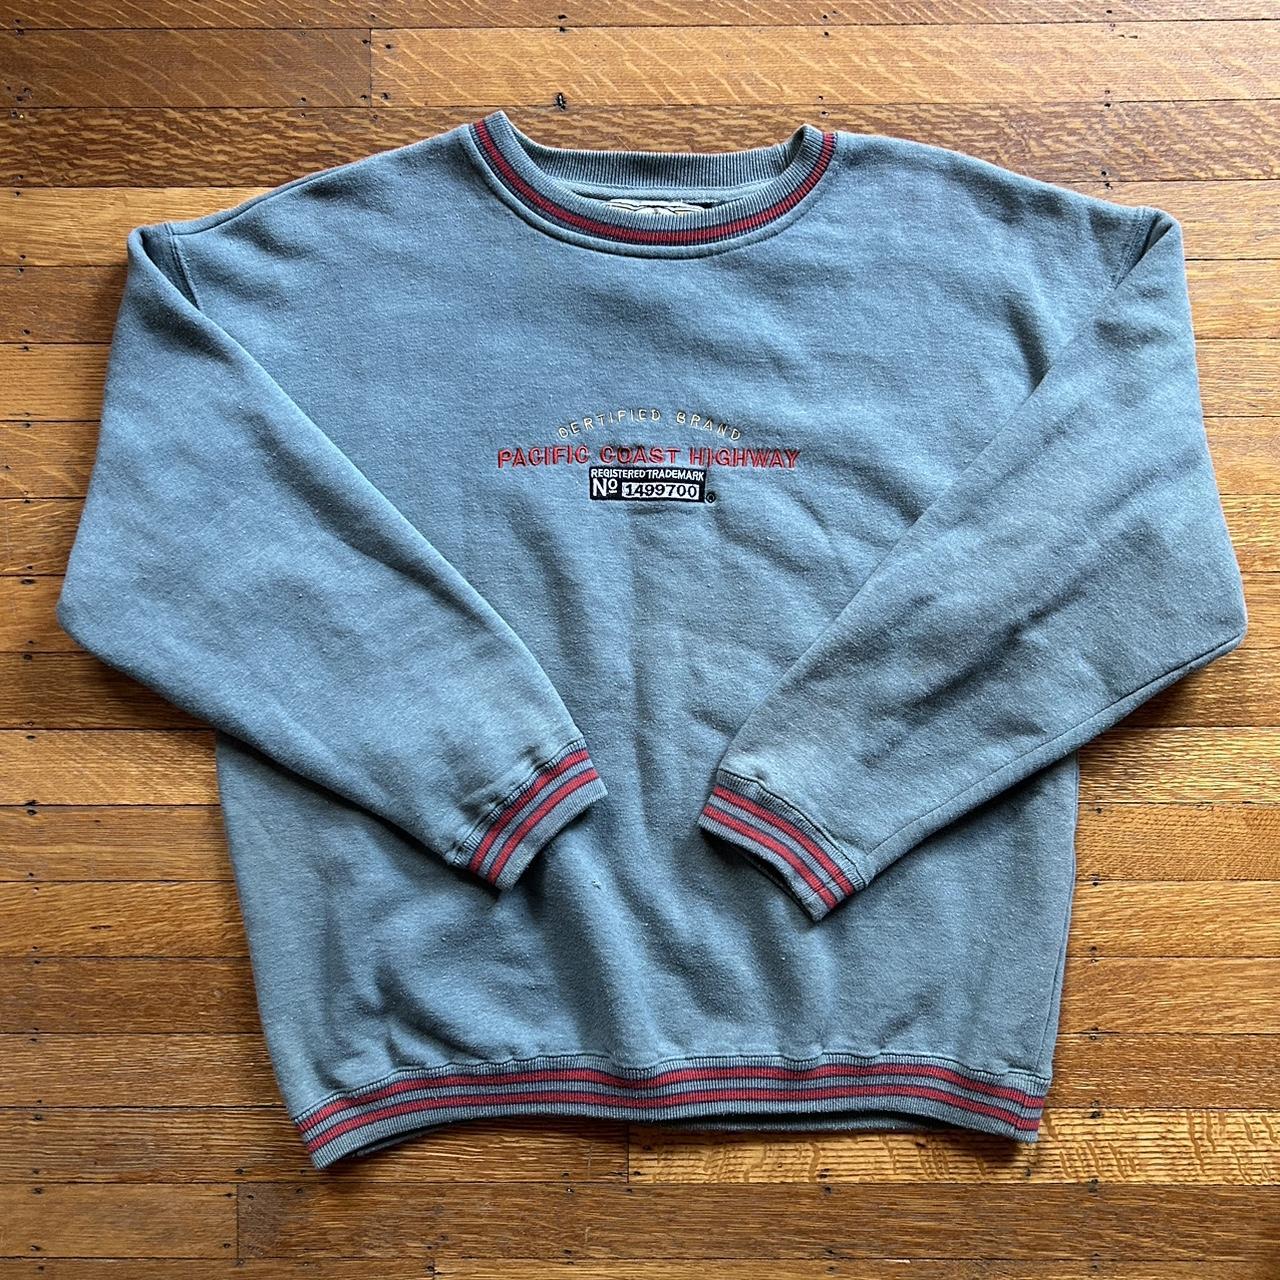 Vintage 91' jazzercise merch from San Leandro - Depop